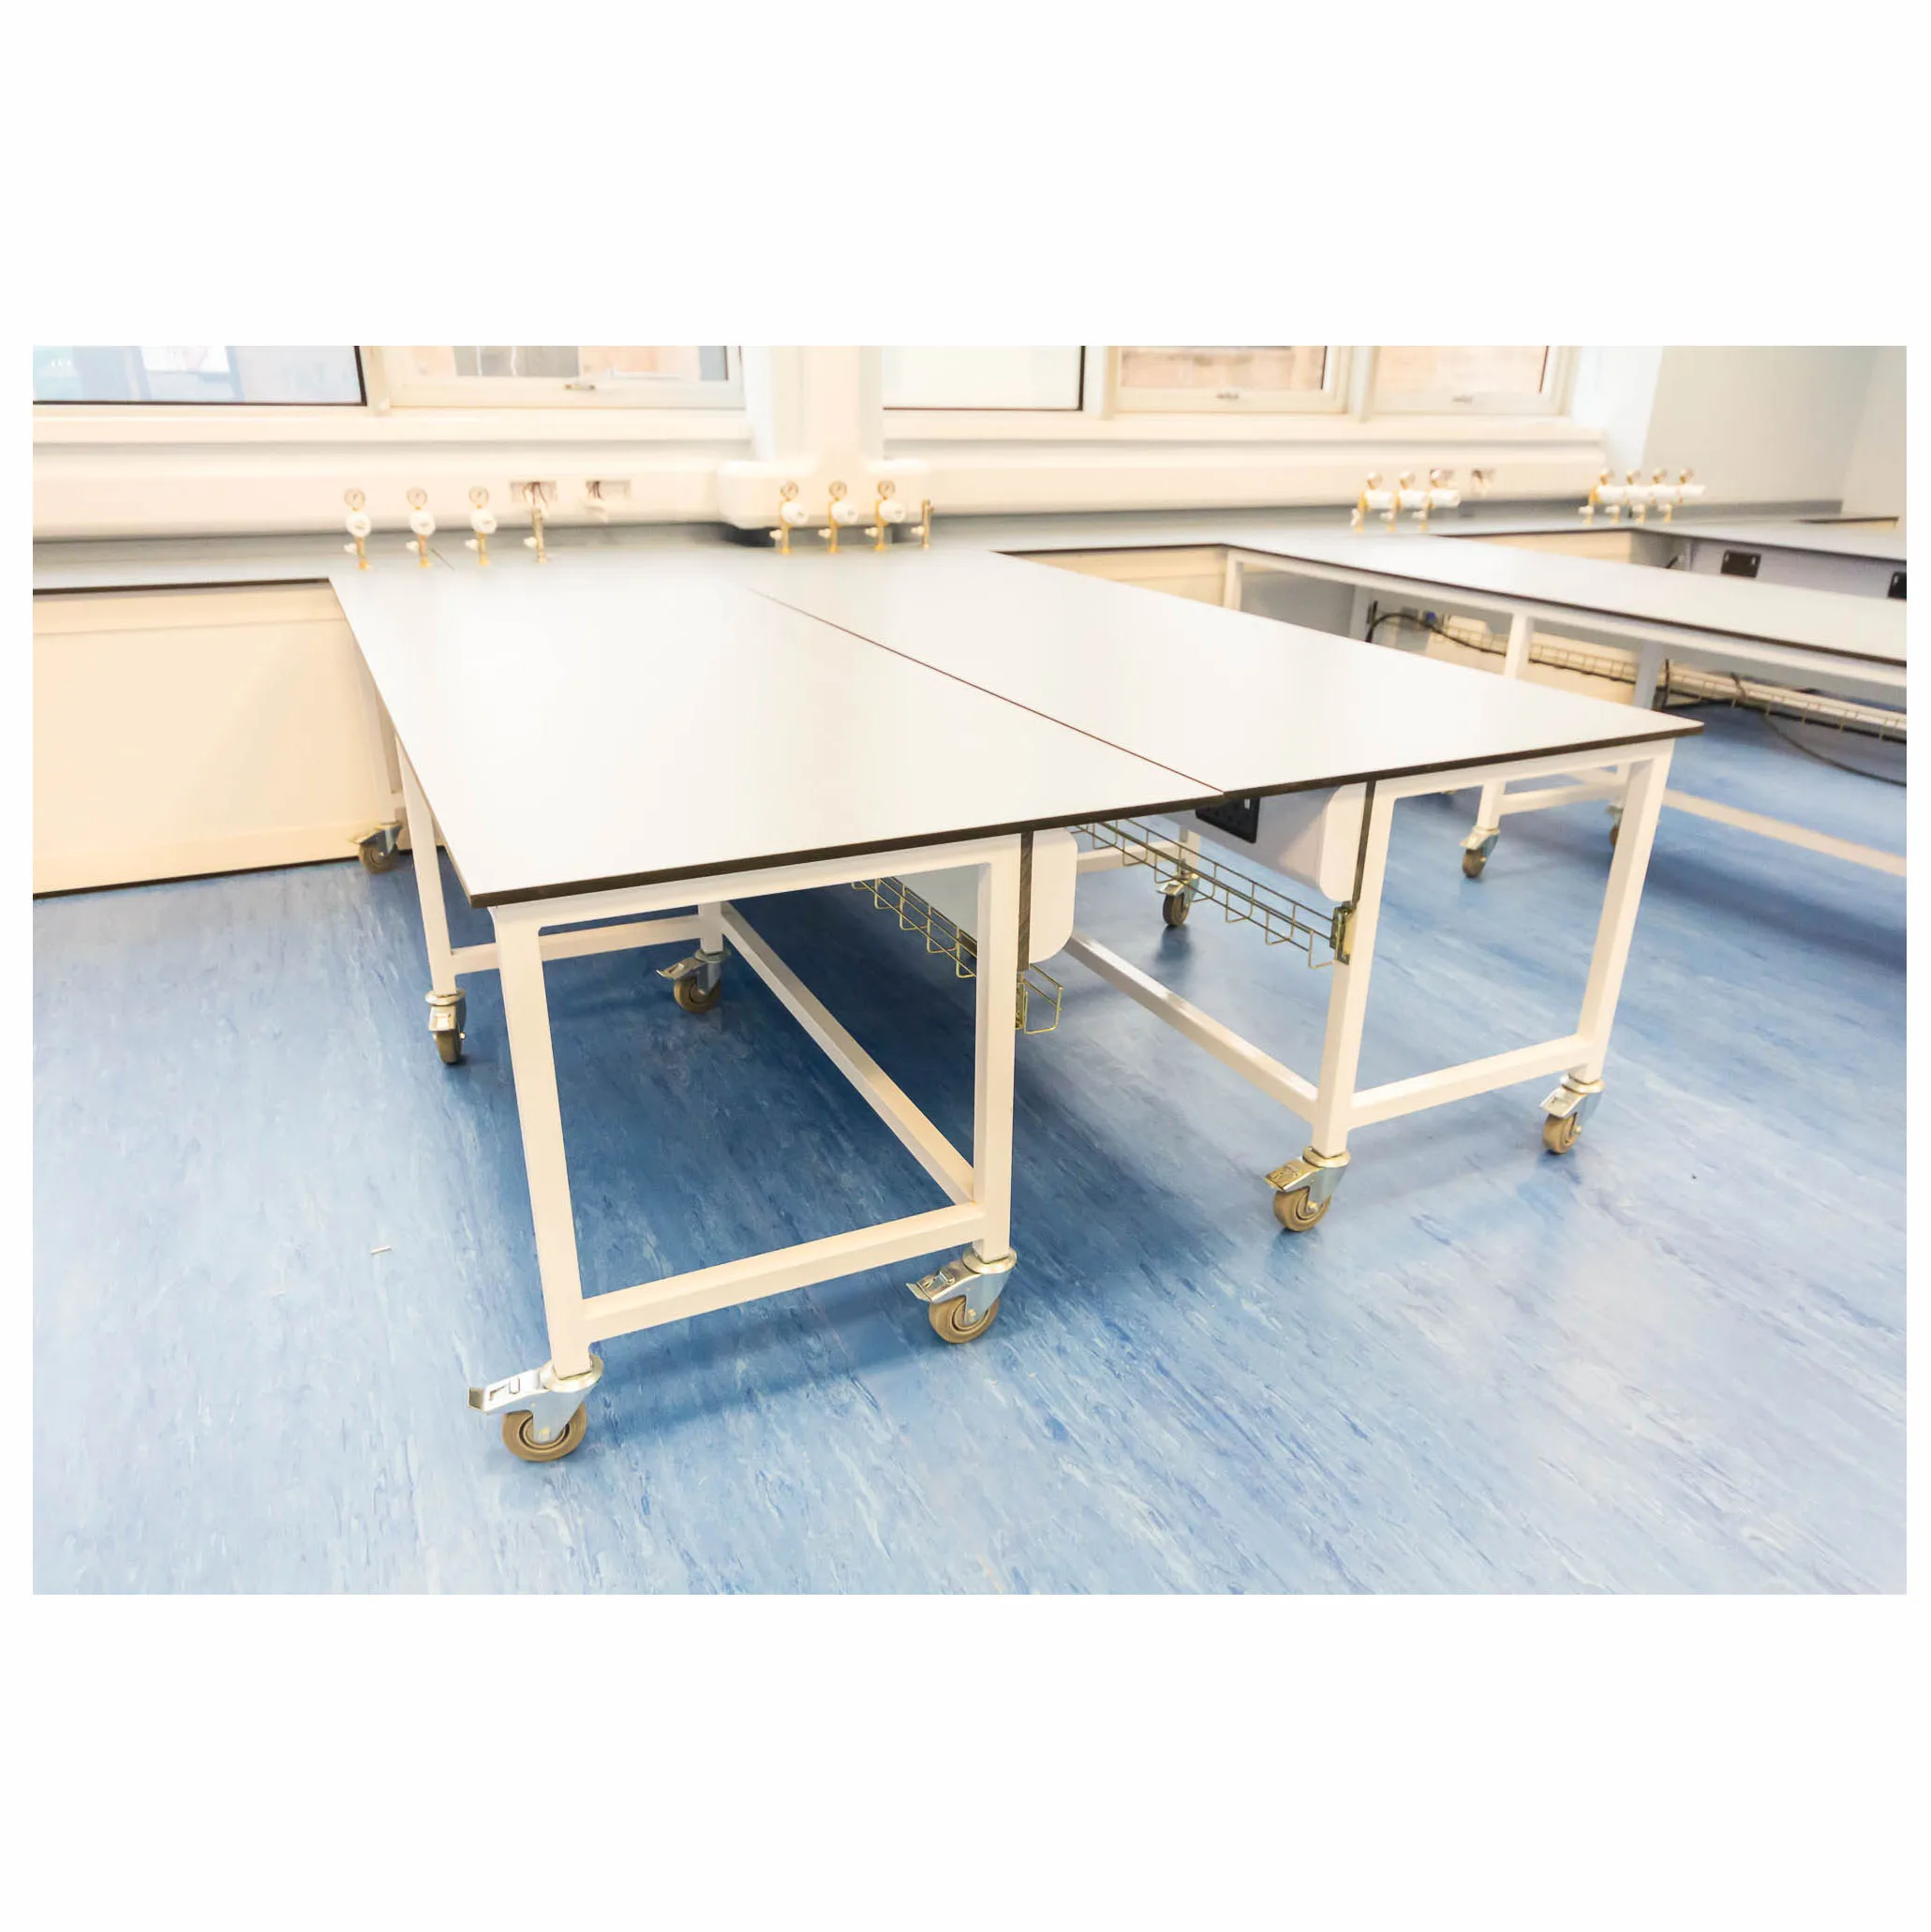 phenolic compact laminate for chemical resistant hpl laboratory worktop physics lab bench